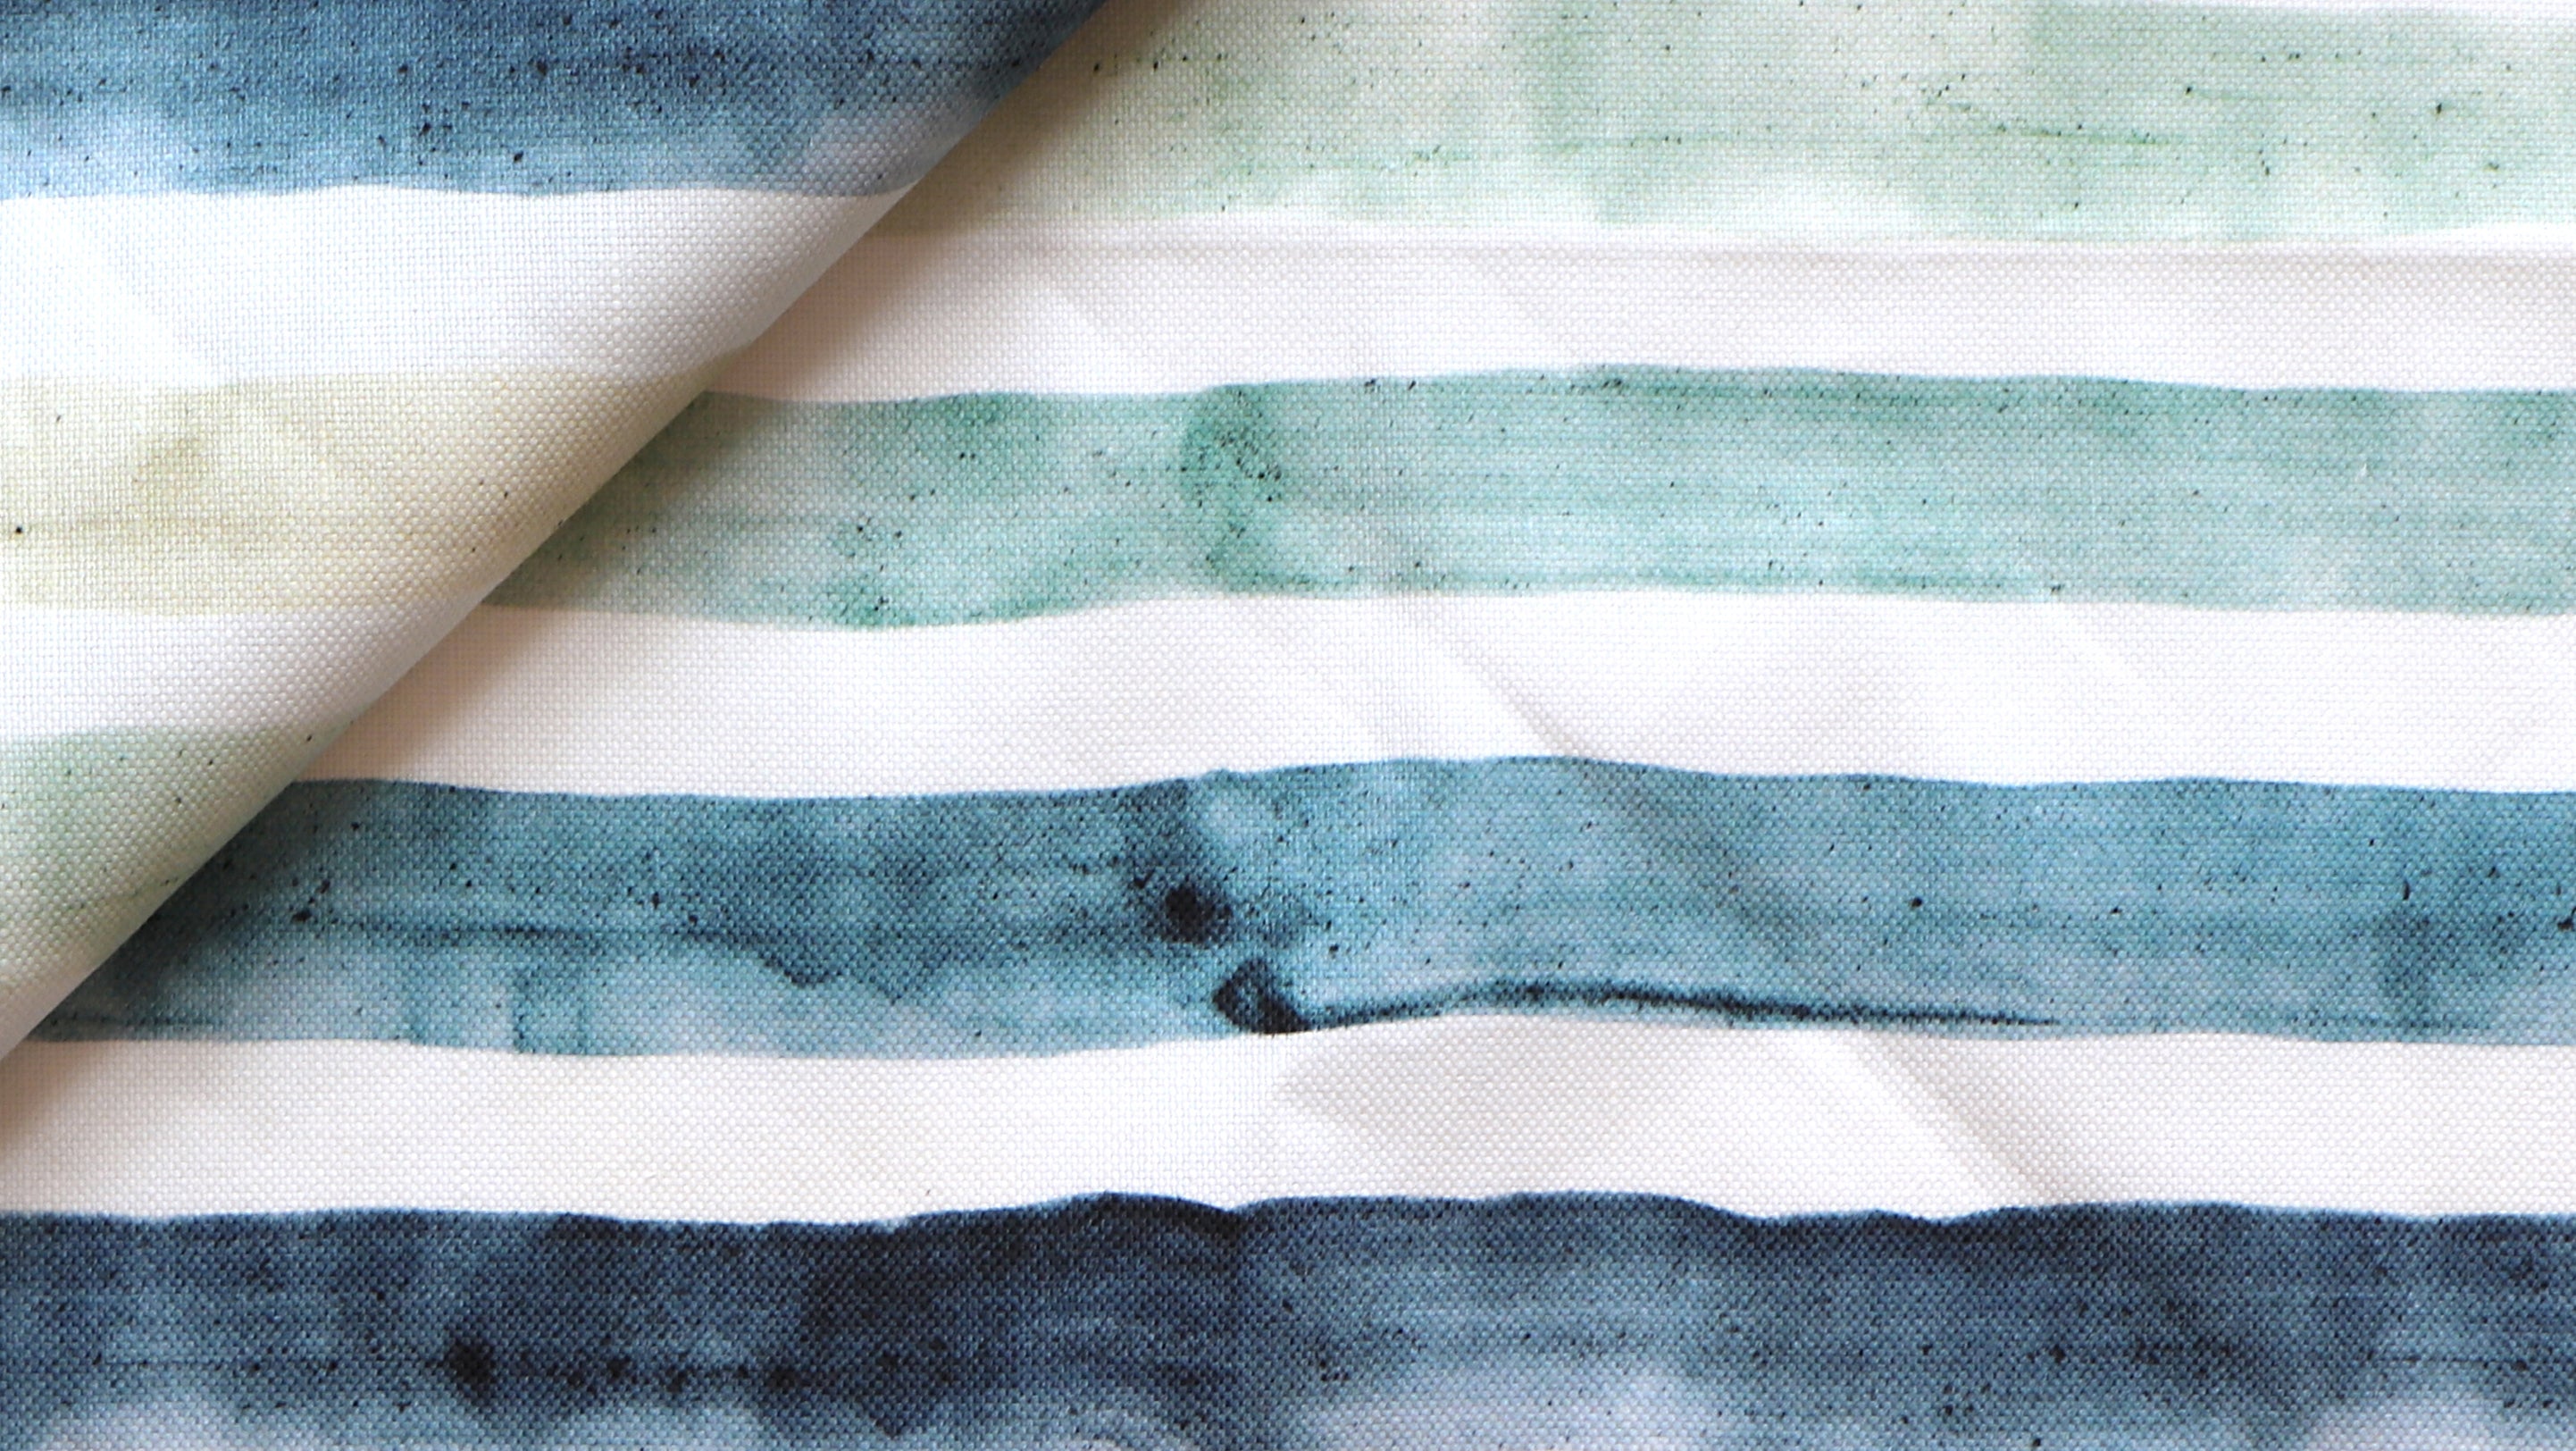 A close up of a blue and green striped fabric